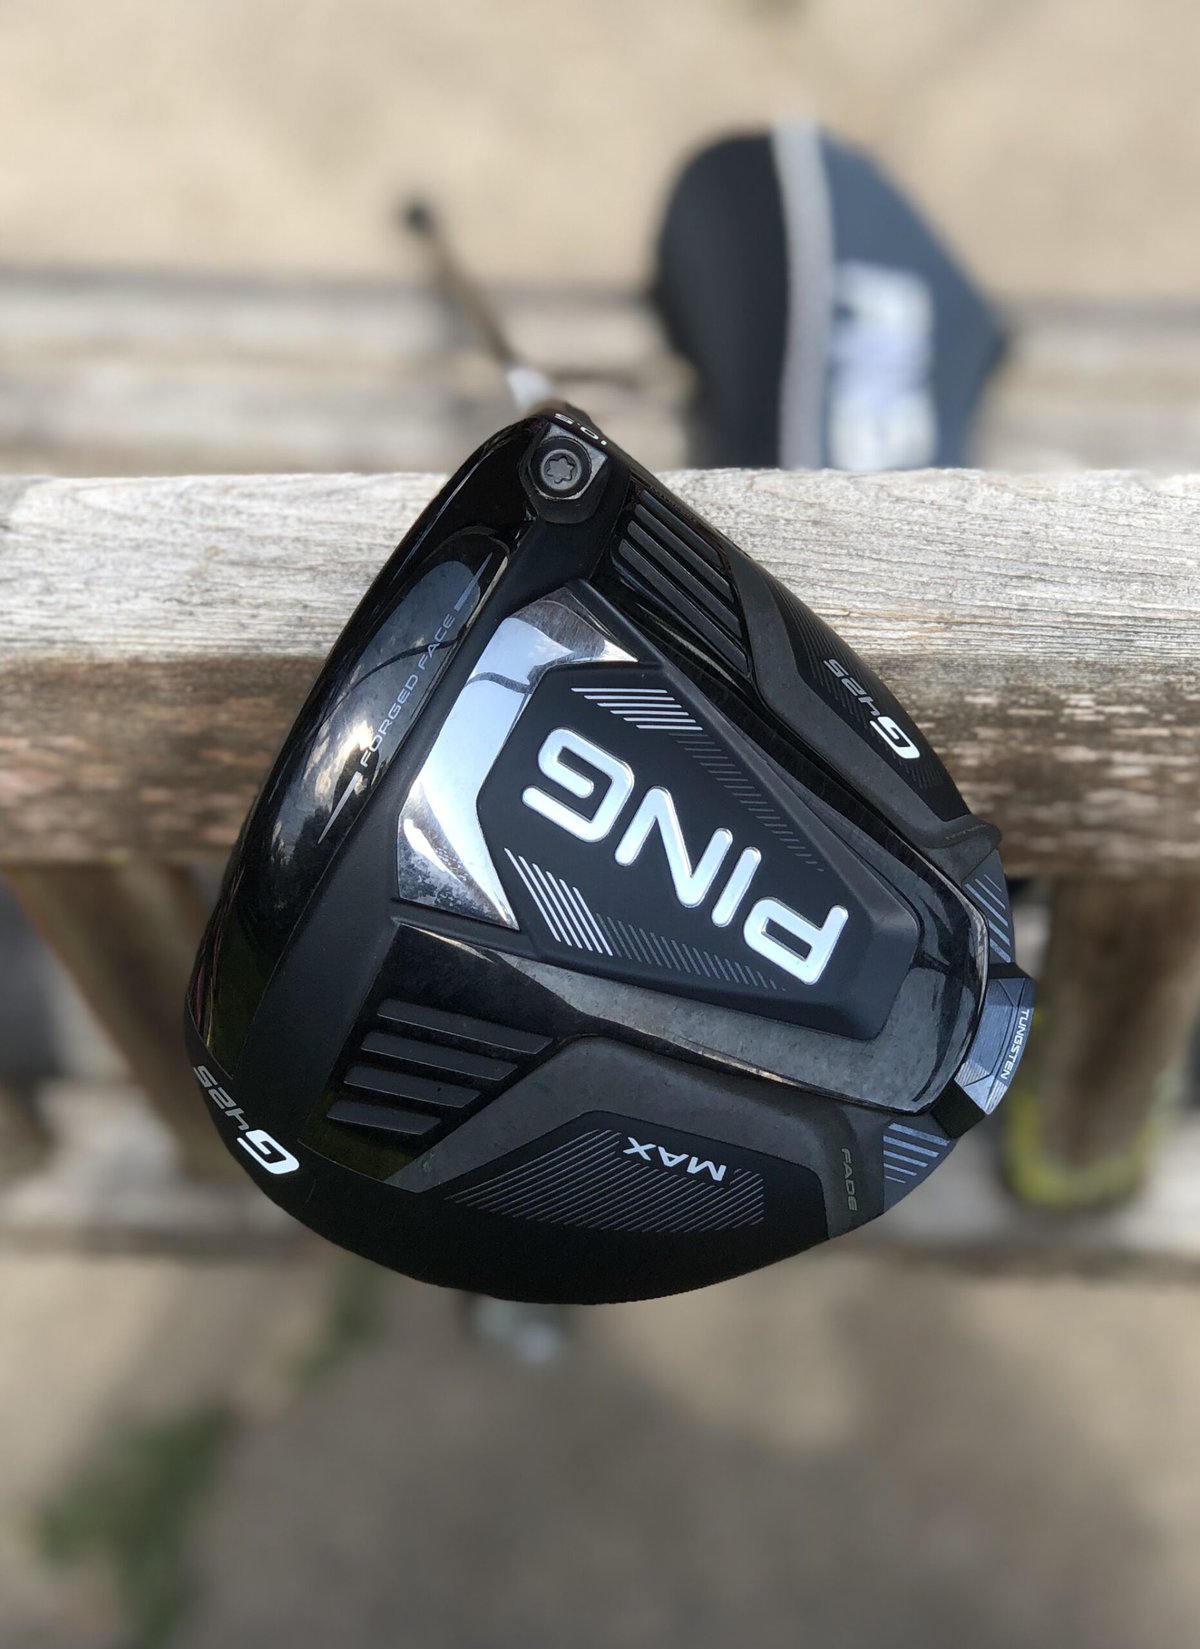 The Ping G425 Max Driver & Blurry Headcover